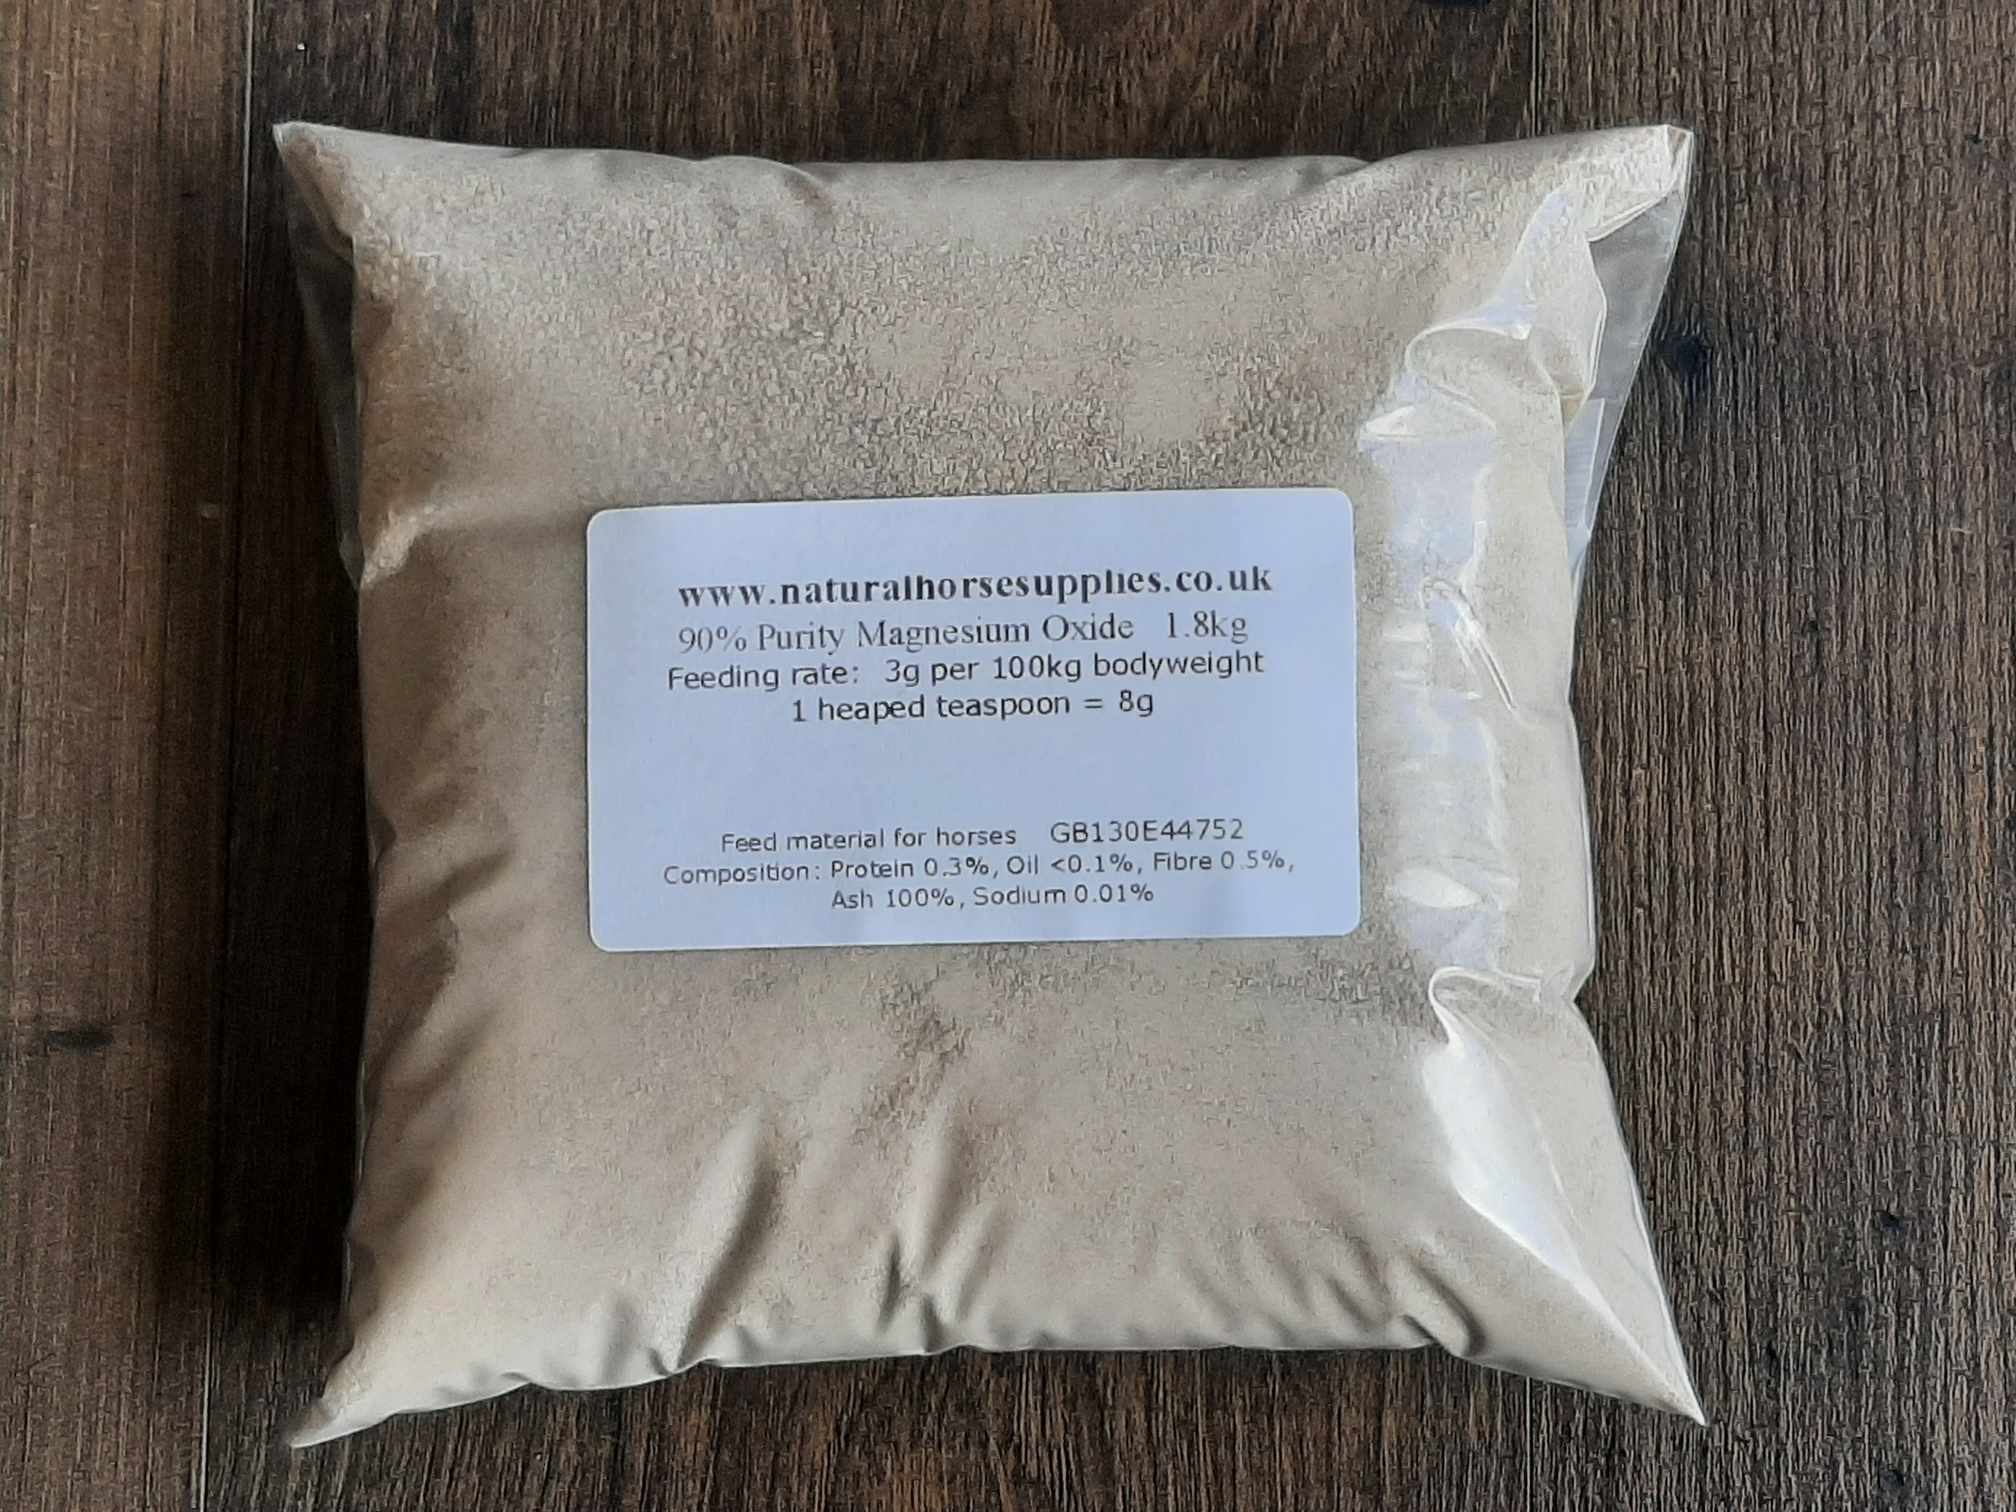 1.8kg 90% purity Magnesium Oxide Mag Ox 